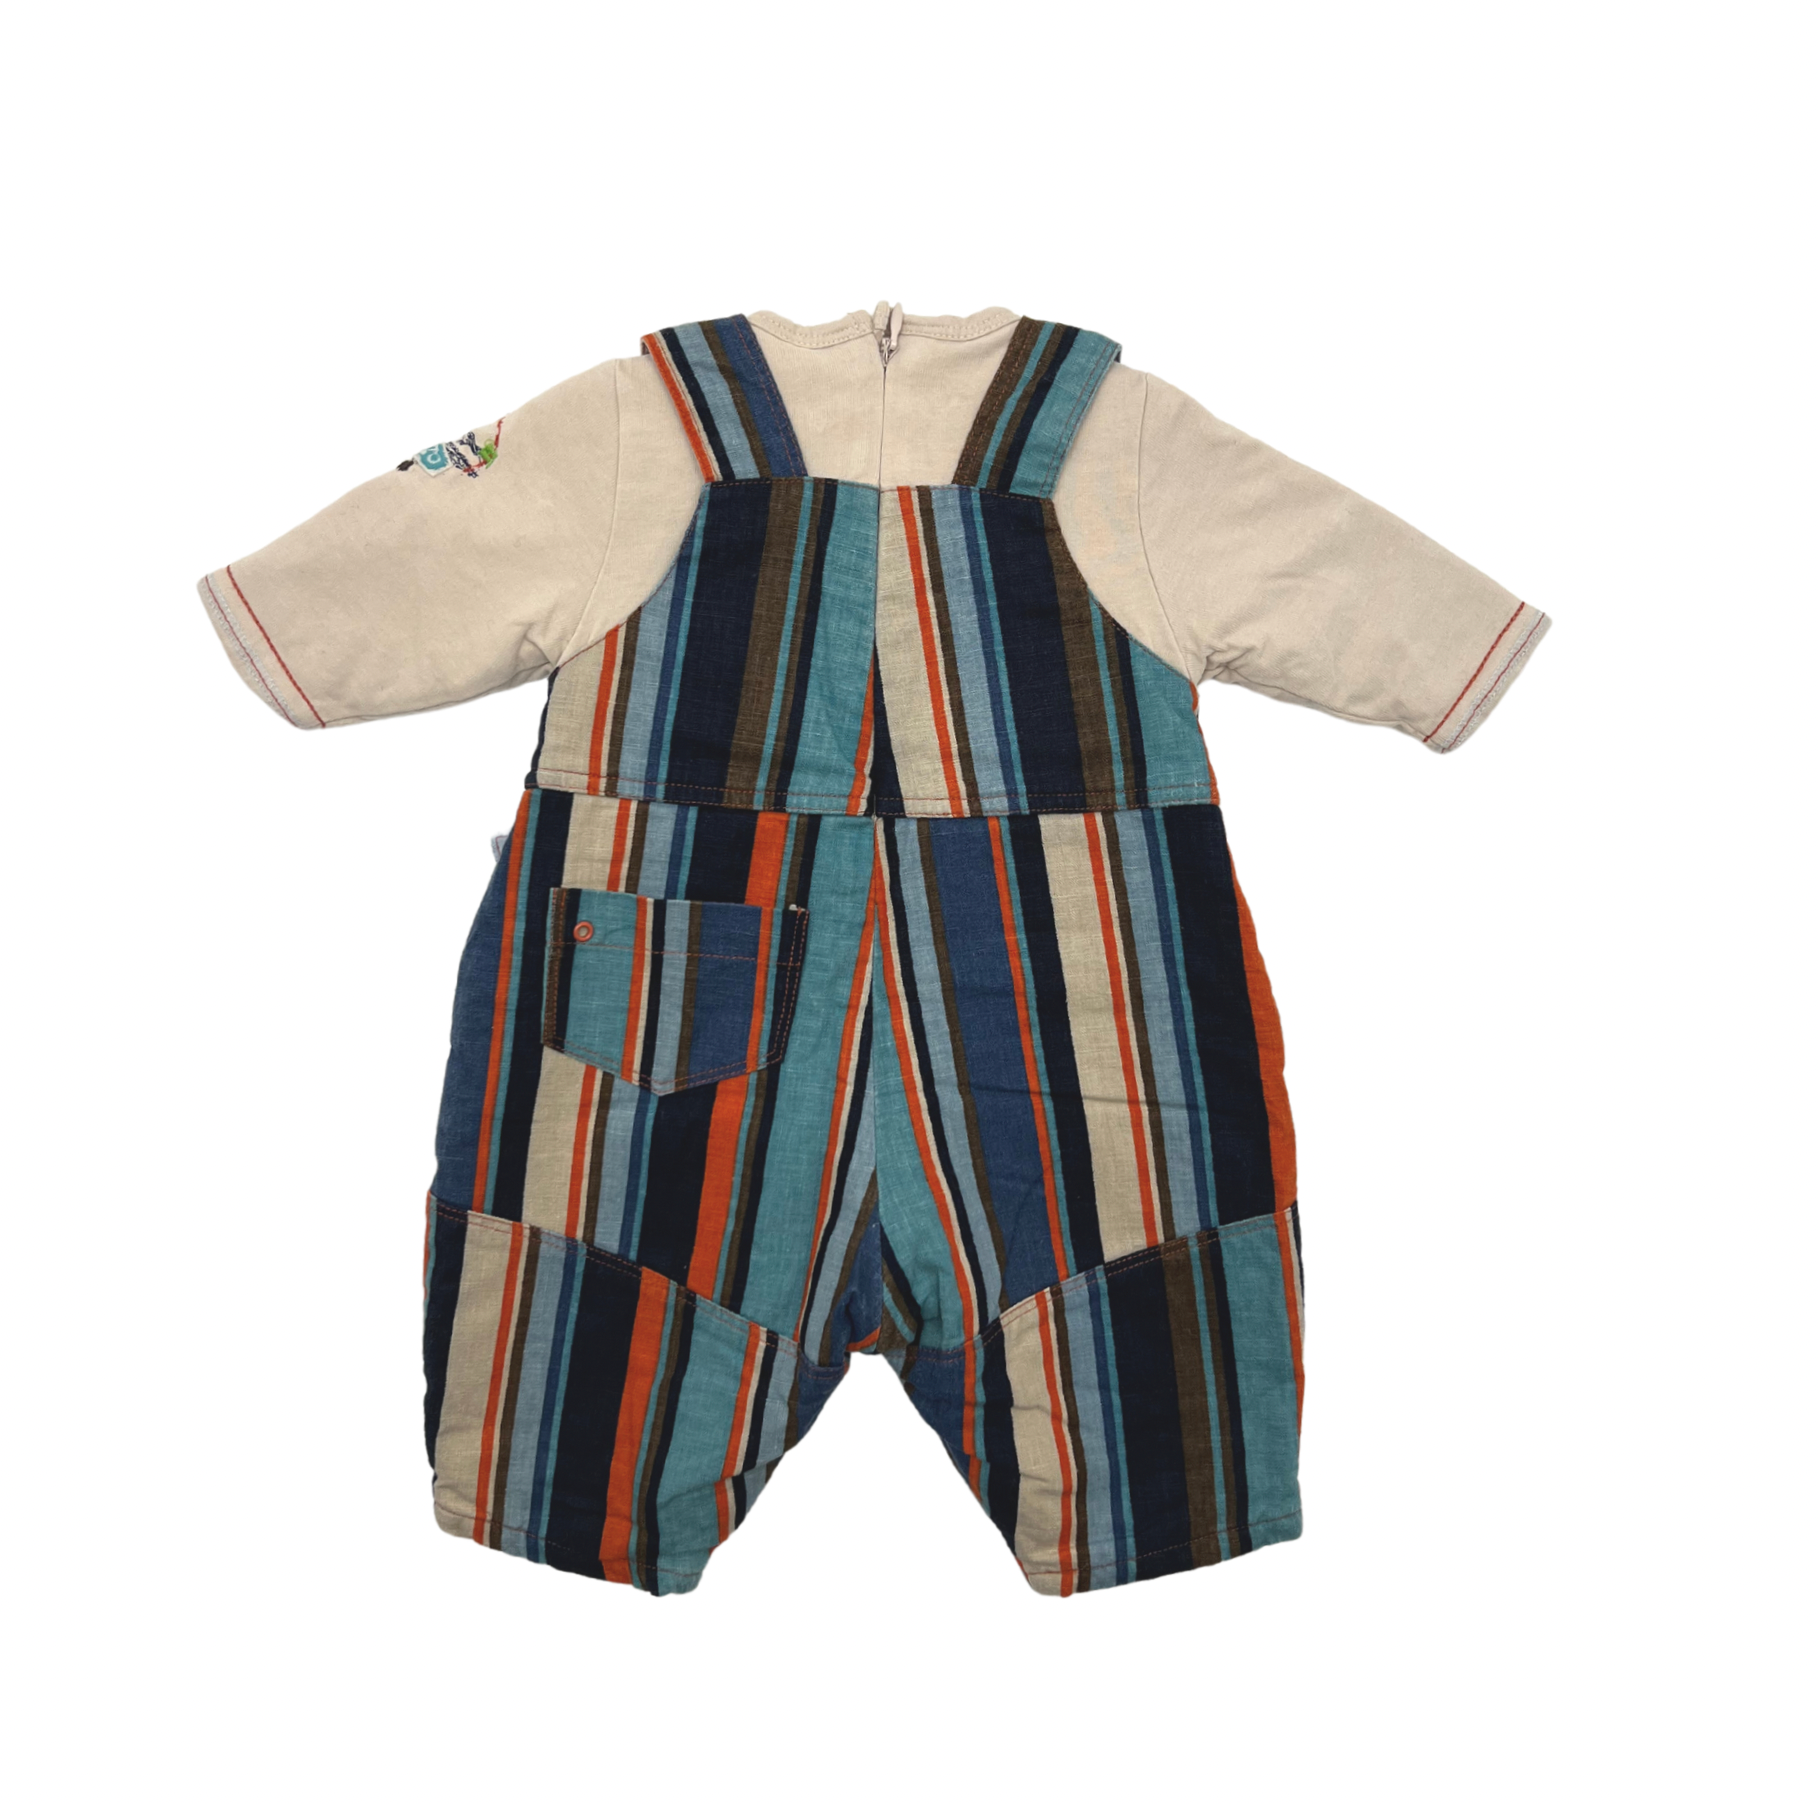 KENZO - Striped linen jumpsuit - 1 month old